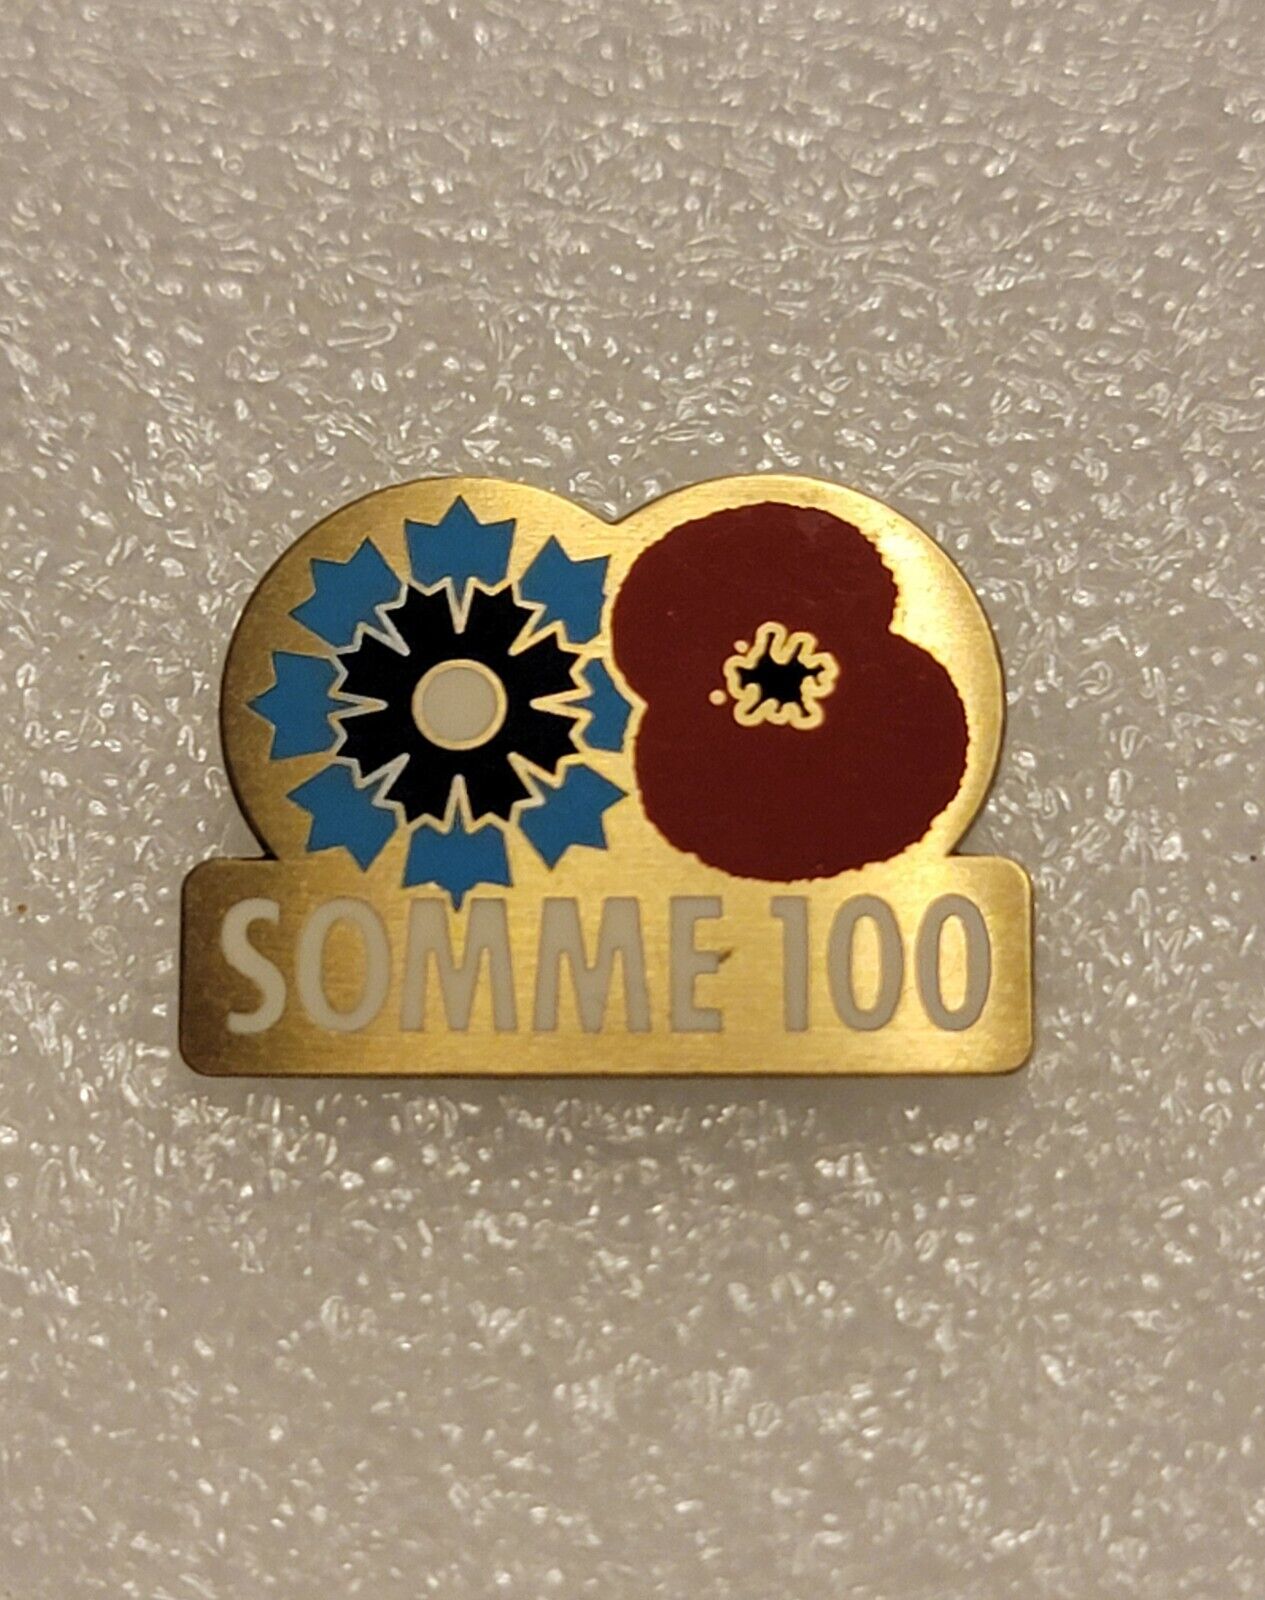 WW1 Battle Of Somme 100 Yr Anniversary Lapel Pin (1916-2016) W Red Poppy